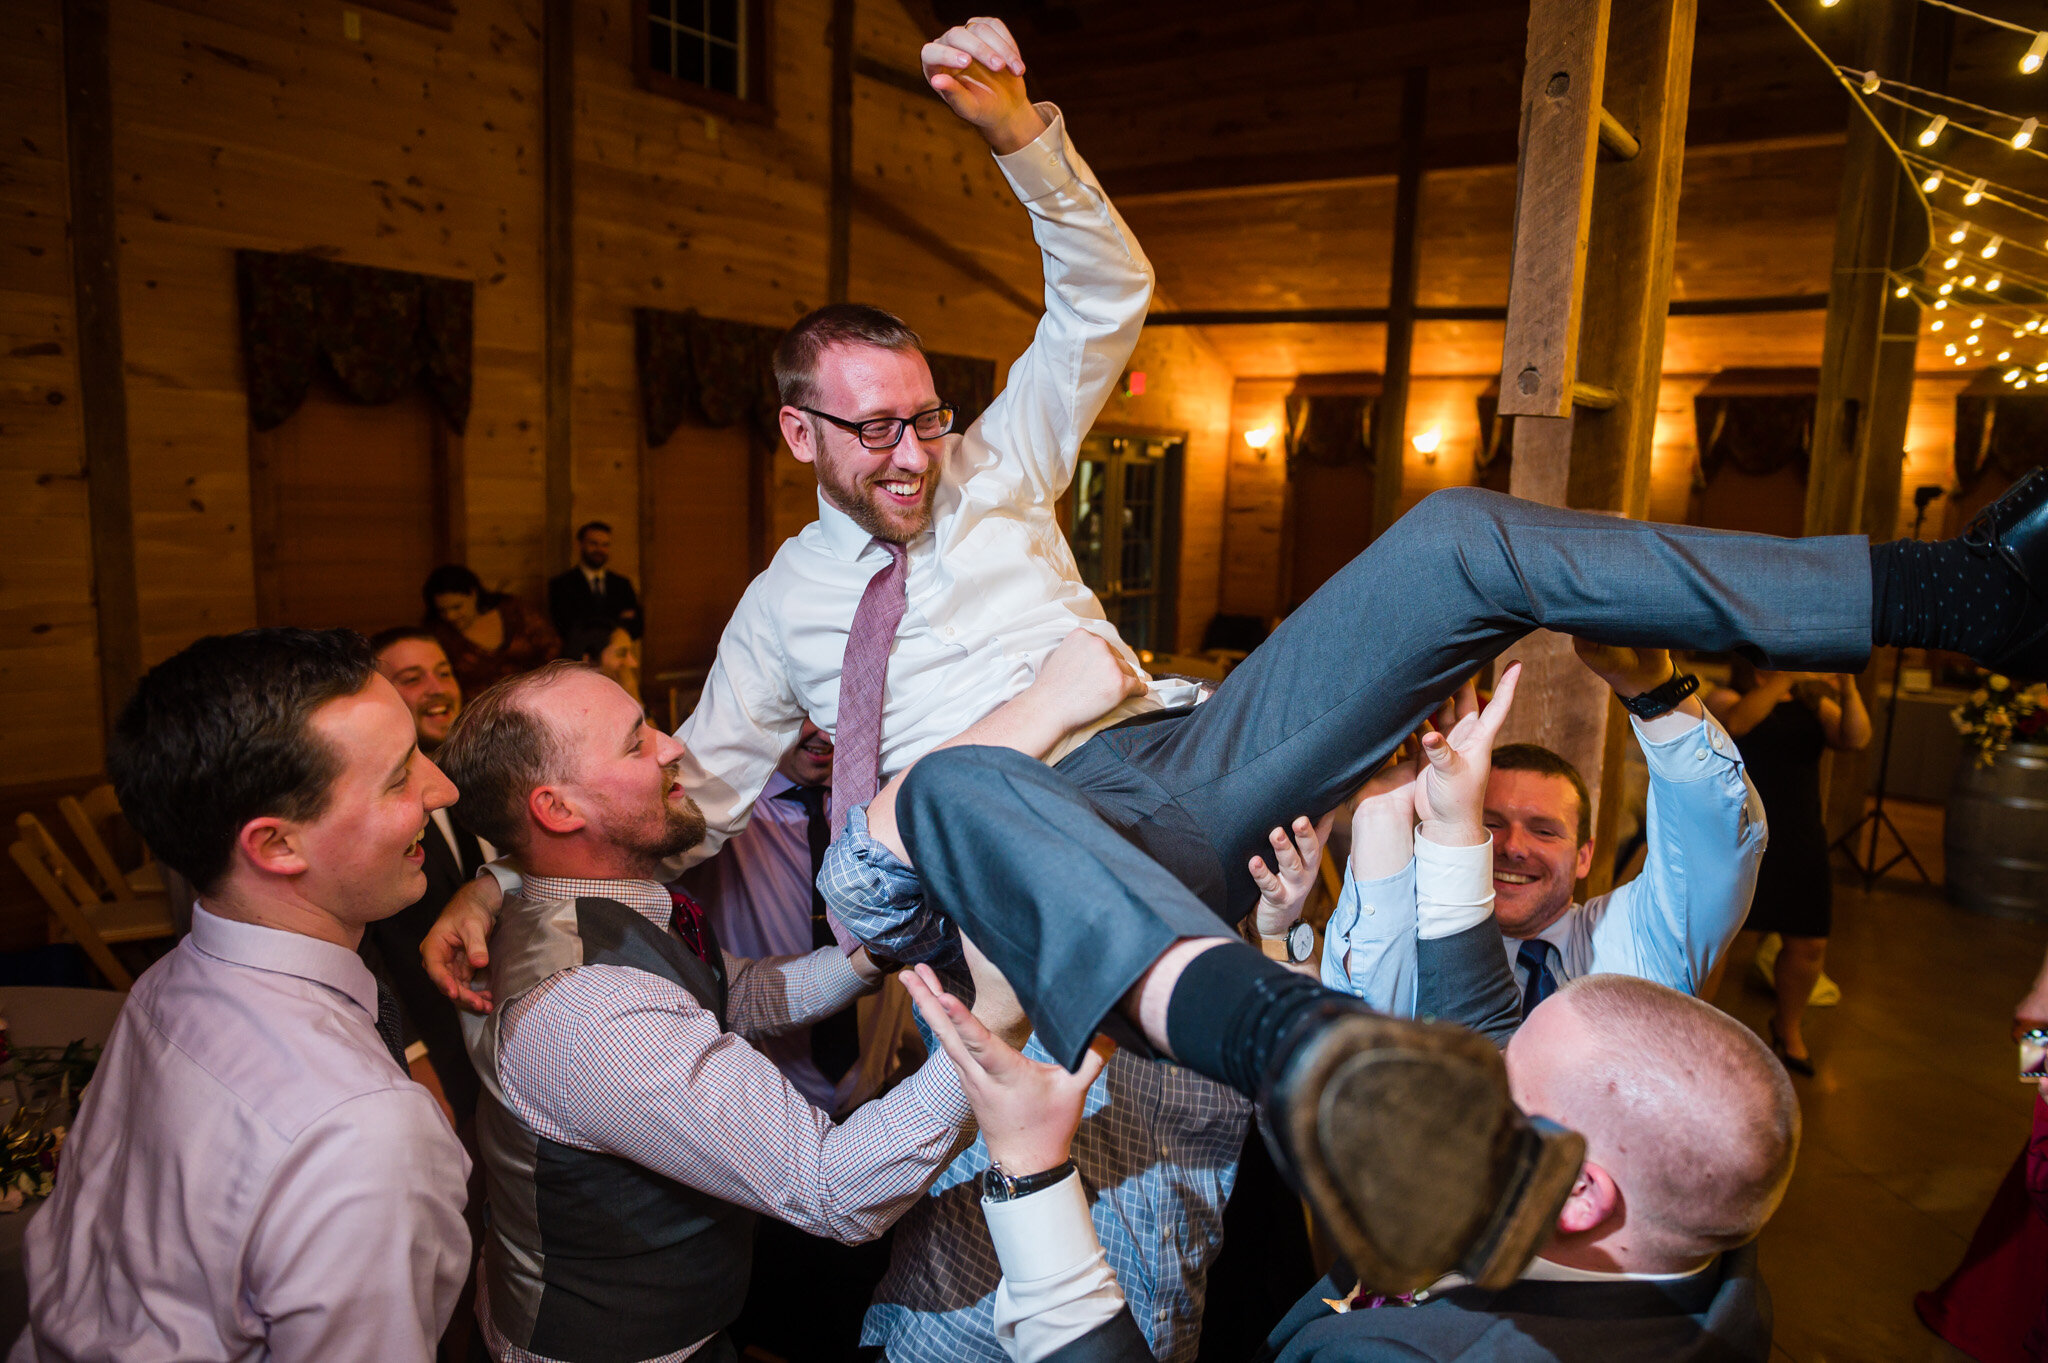 groom being carried at wedding reception